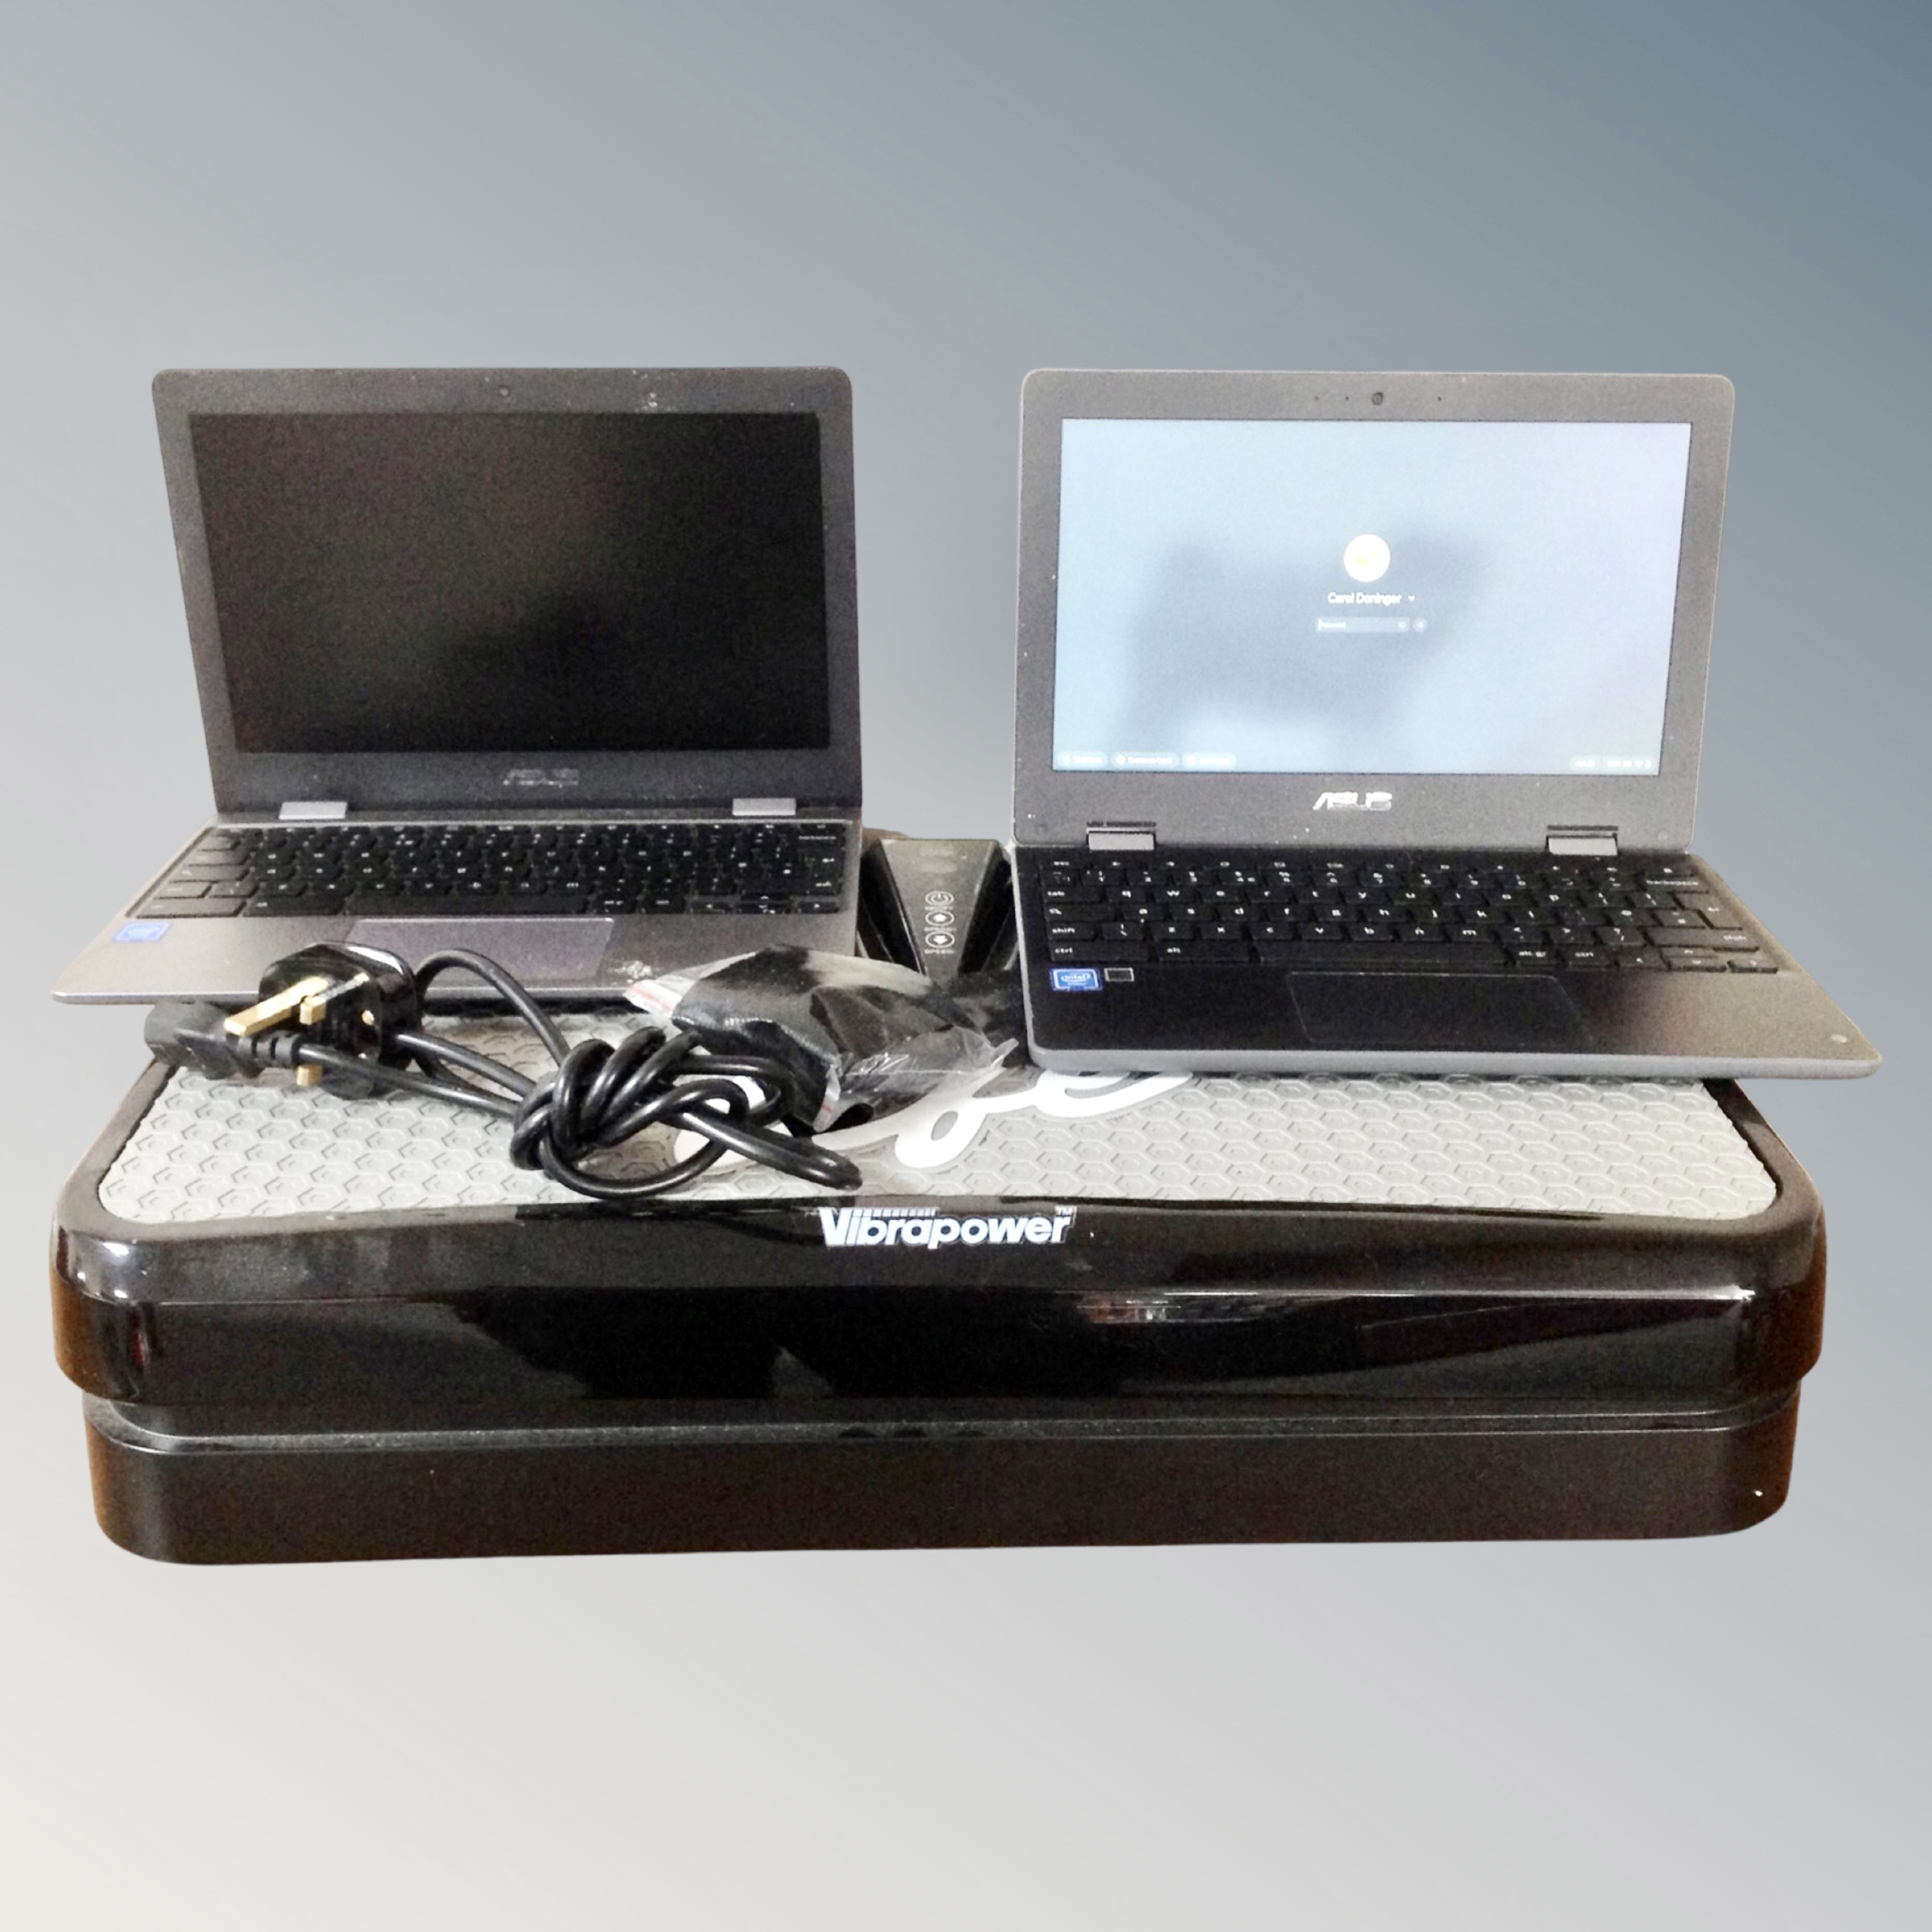 A vibra power vibration plate together with two Asus chrome books (no leads).